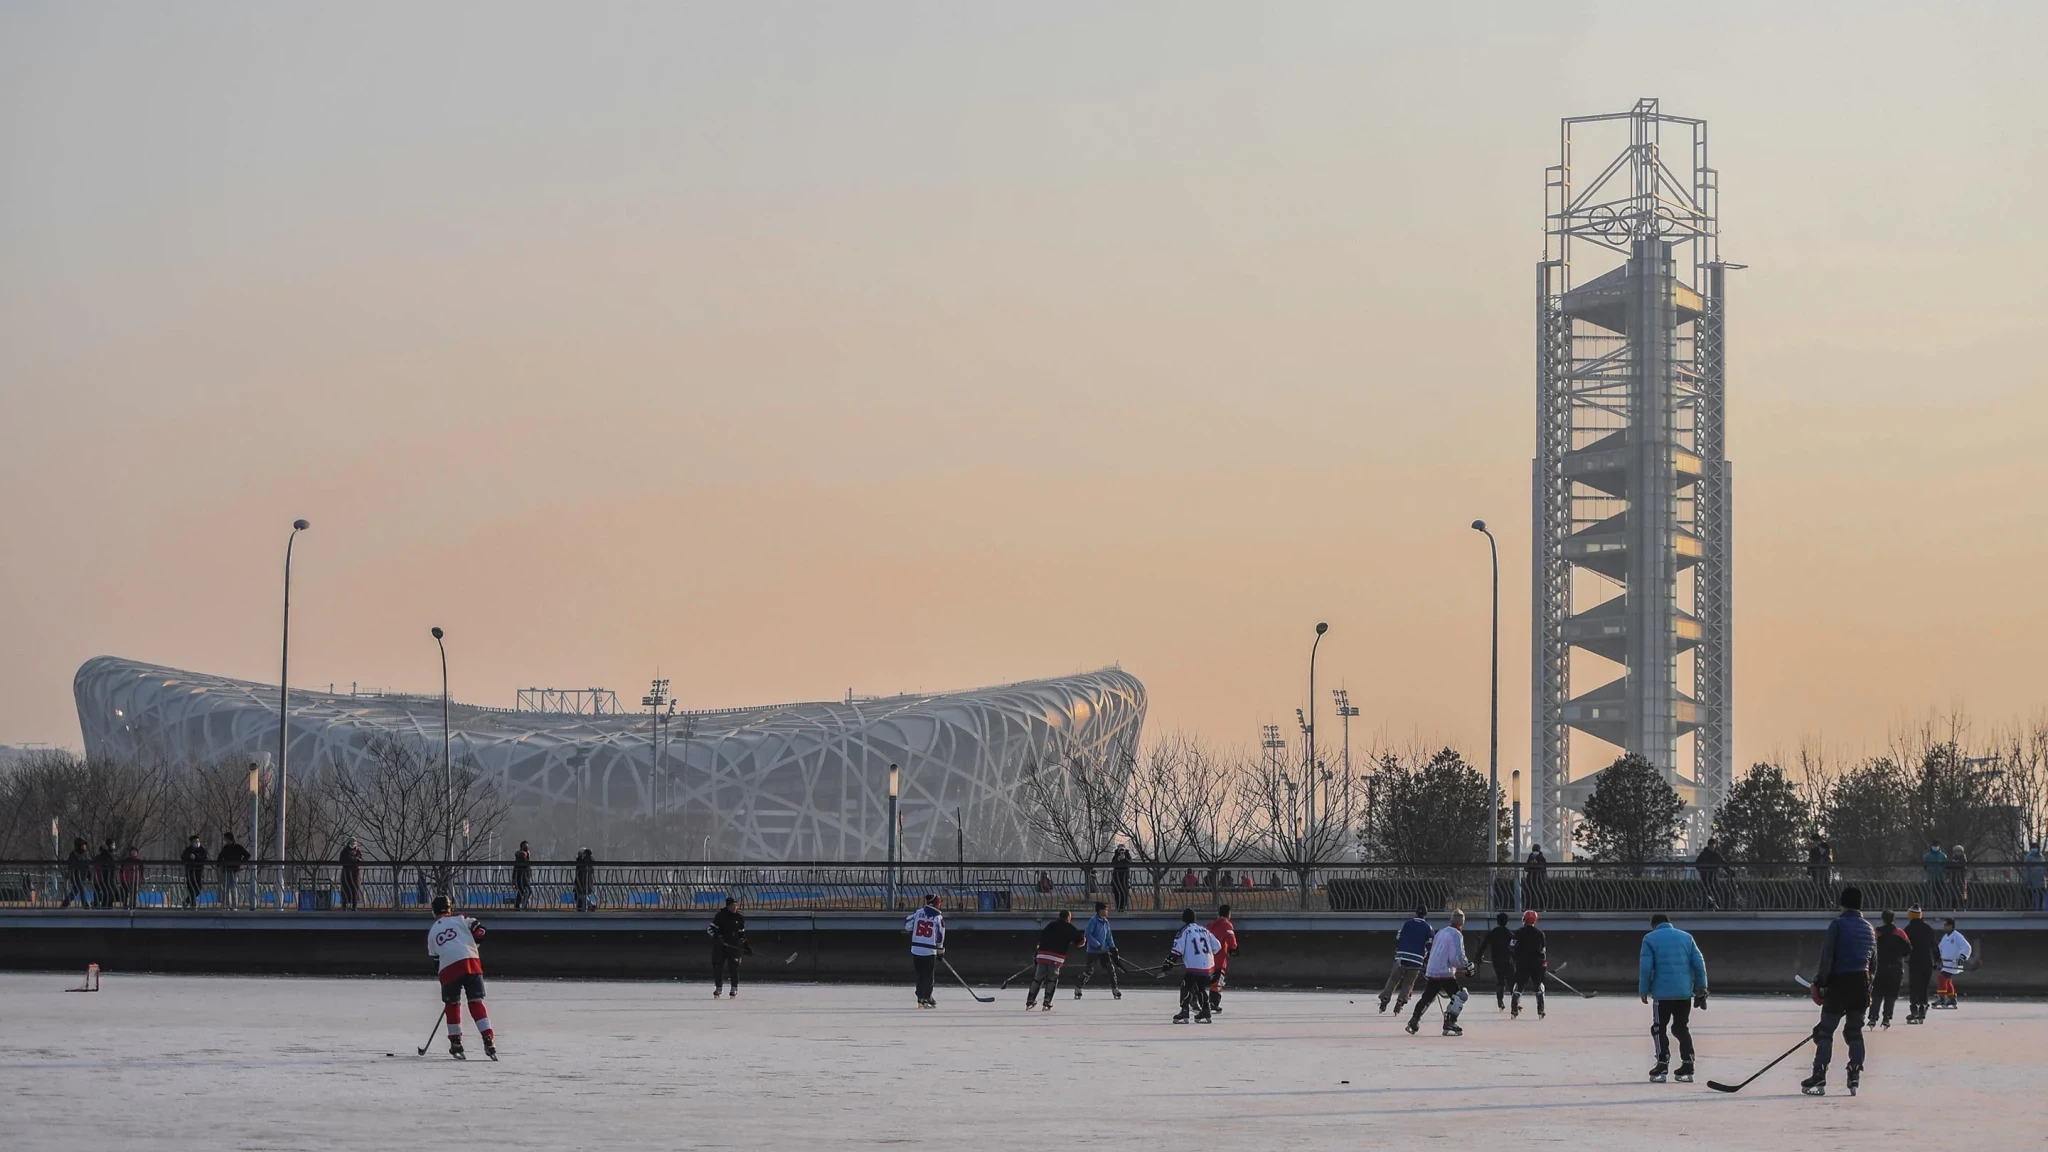 Playbook rules for the Beijing 2022 Winter Olympics were addressed during calls with athlete representatives, National Olympic Committees and International Olympic Winter Sports Federations ©Getty Images